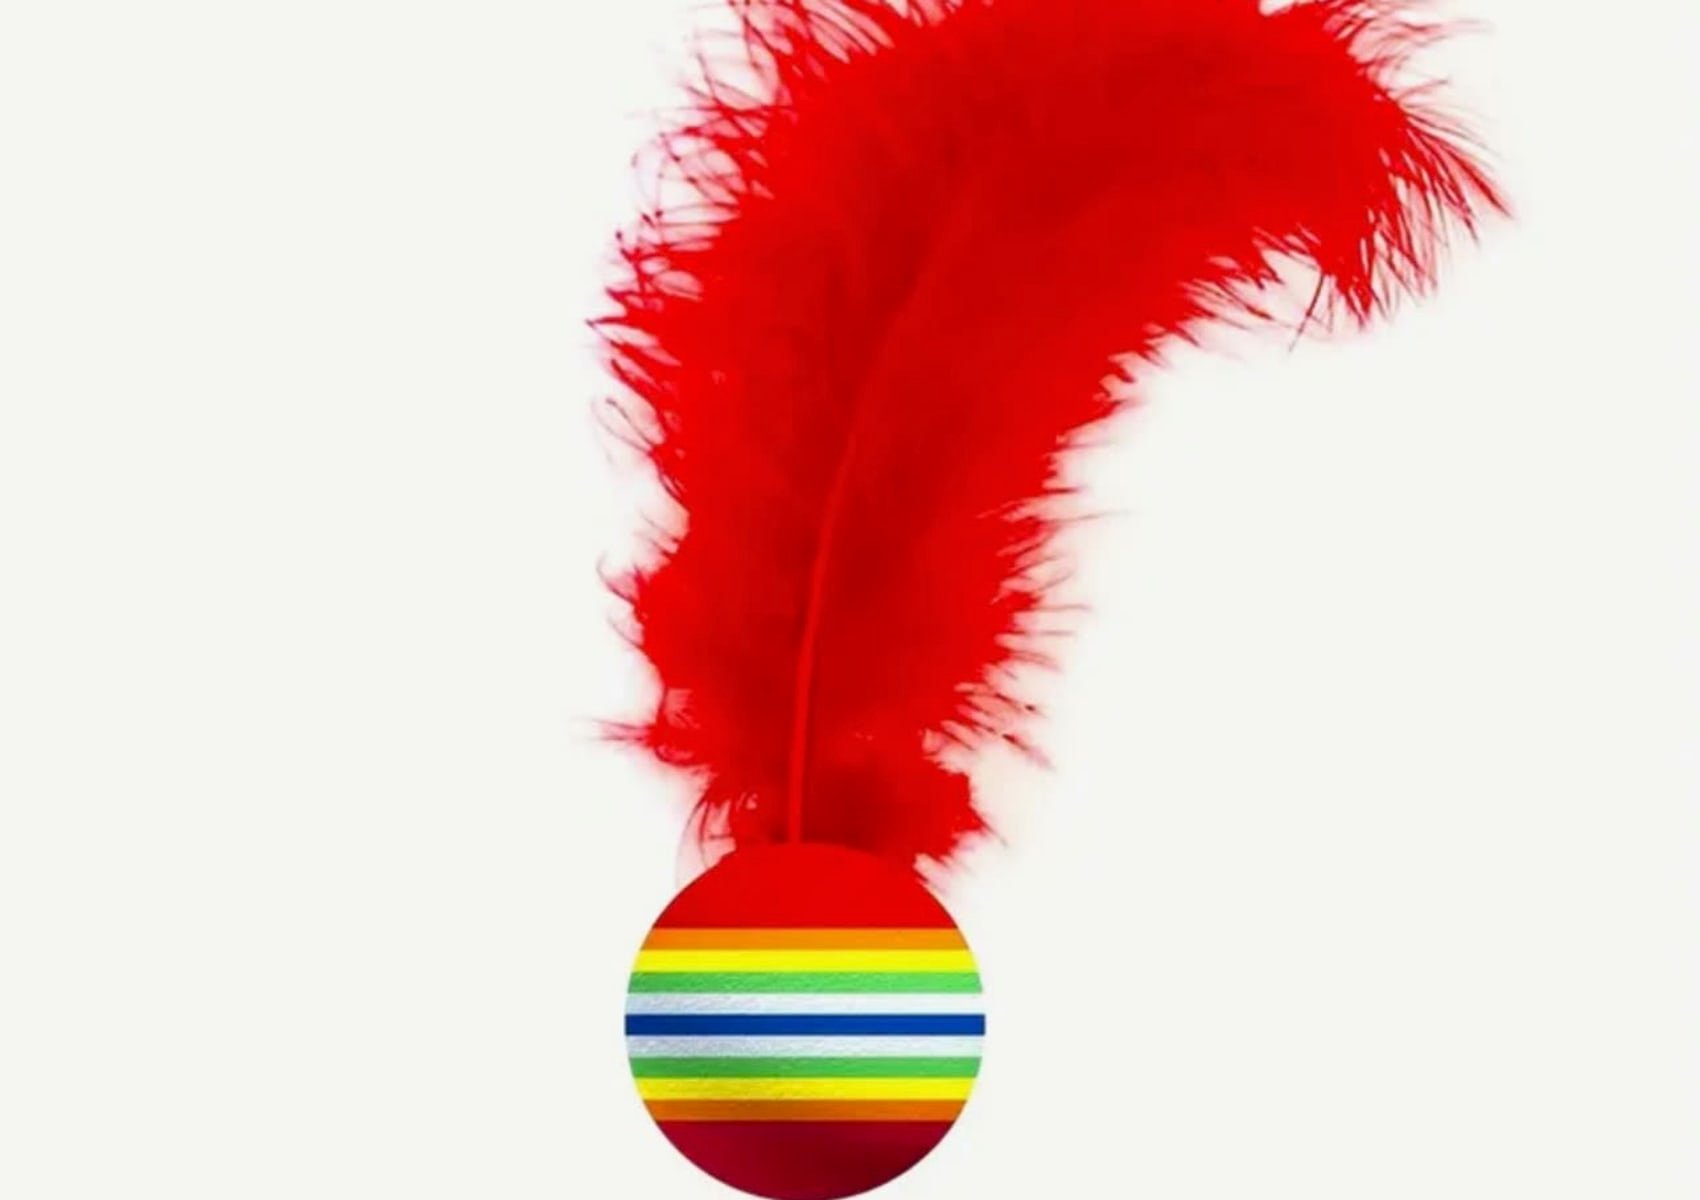 A feather and ball cat toy to amuse your kitten or cat